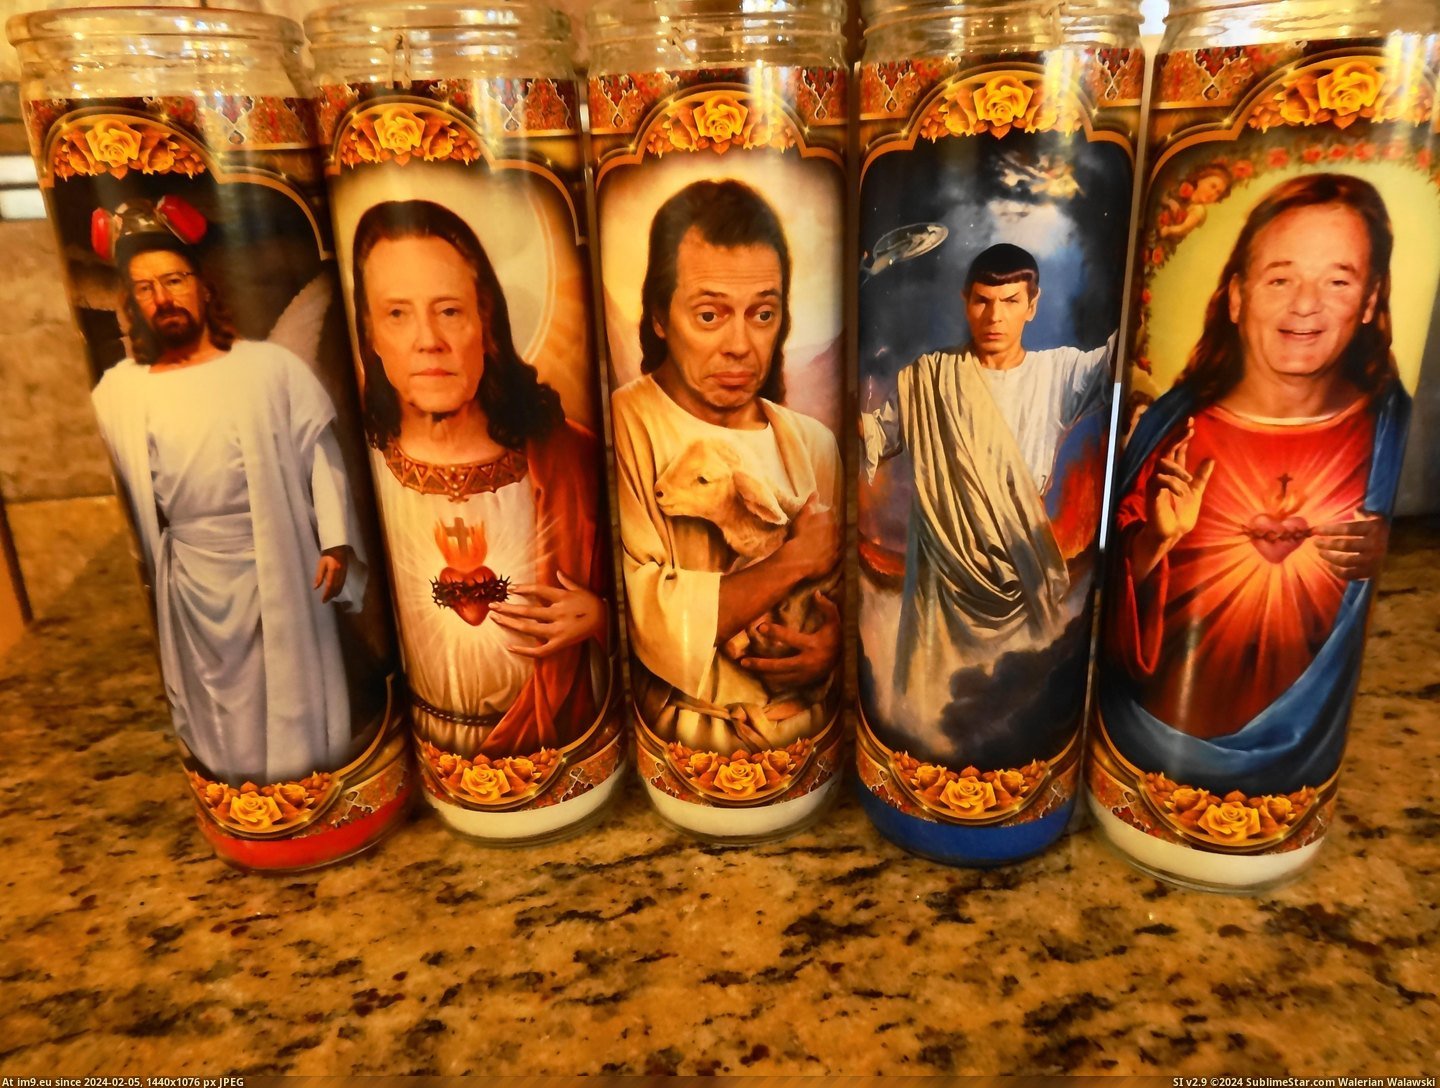 #Funny #Year #Dad #Outdid #Religous #Holidays #Odd #Candles [Funny] Every year my dad gets us odd religous candles around the holidays. This year he really outdid himself. Pic. (Изображение из альбом My r/FUNNY favs))